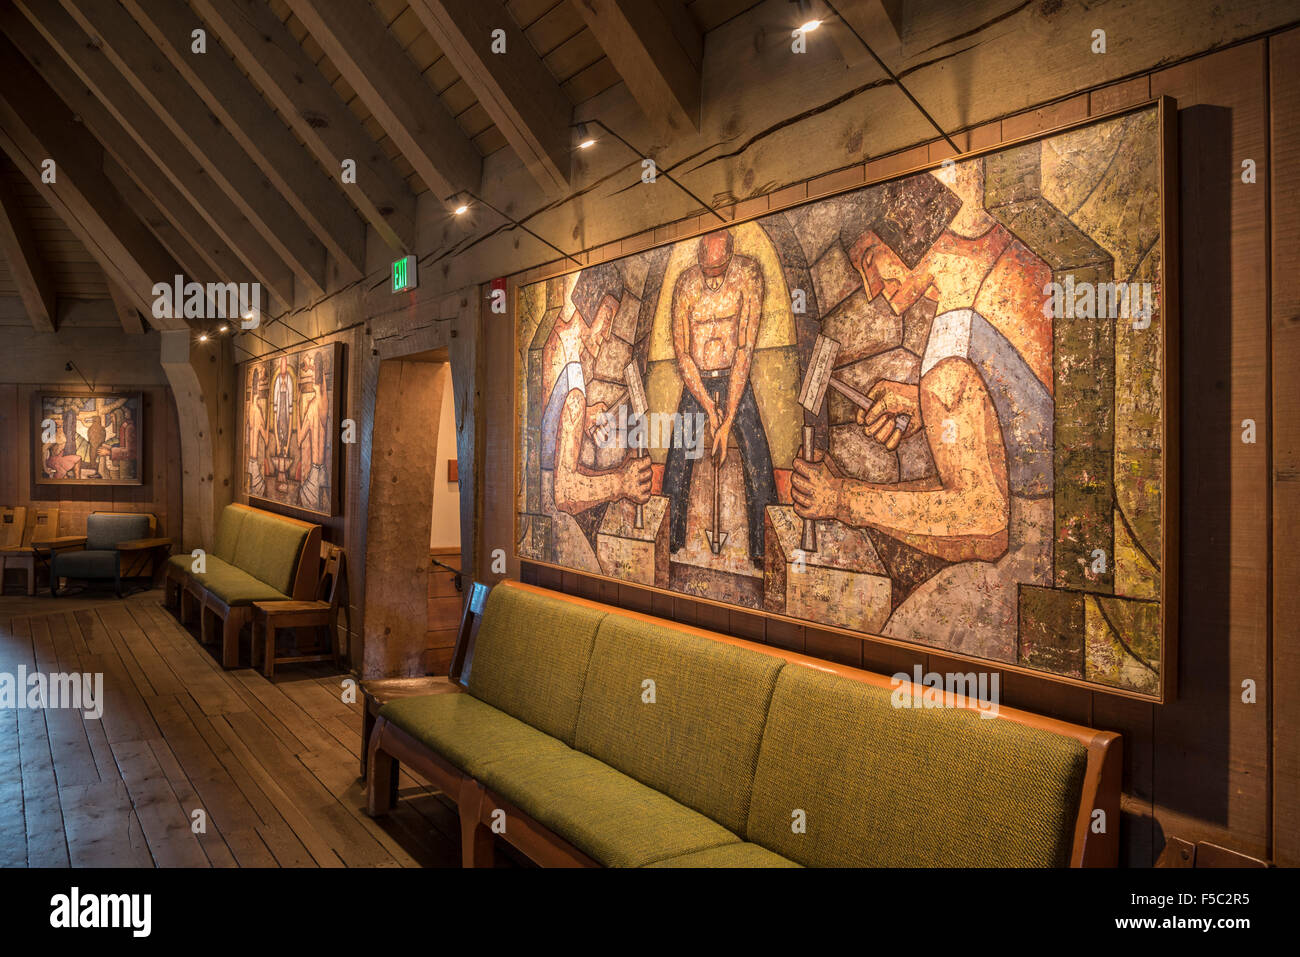 Paintings by artists Howard S. Sewall in the lobby at Timberline Lodge on Mount Hood, Cascade Mountains, Oregon. Stock Photo